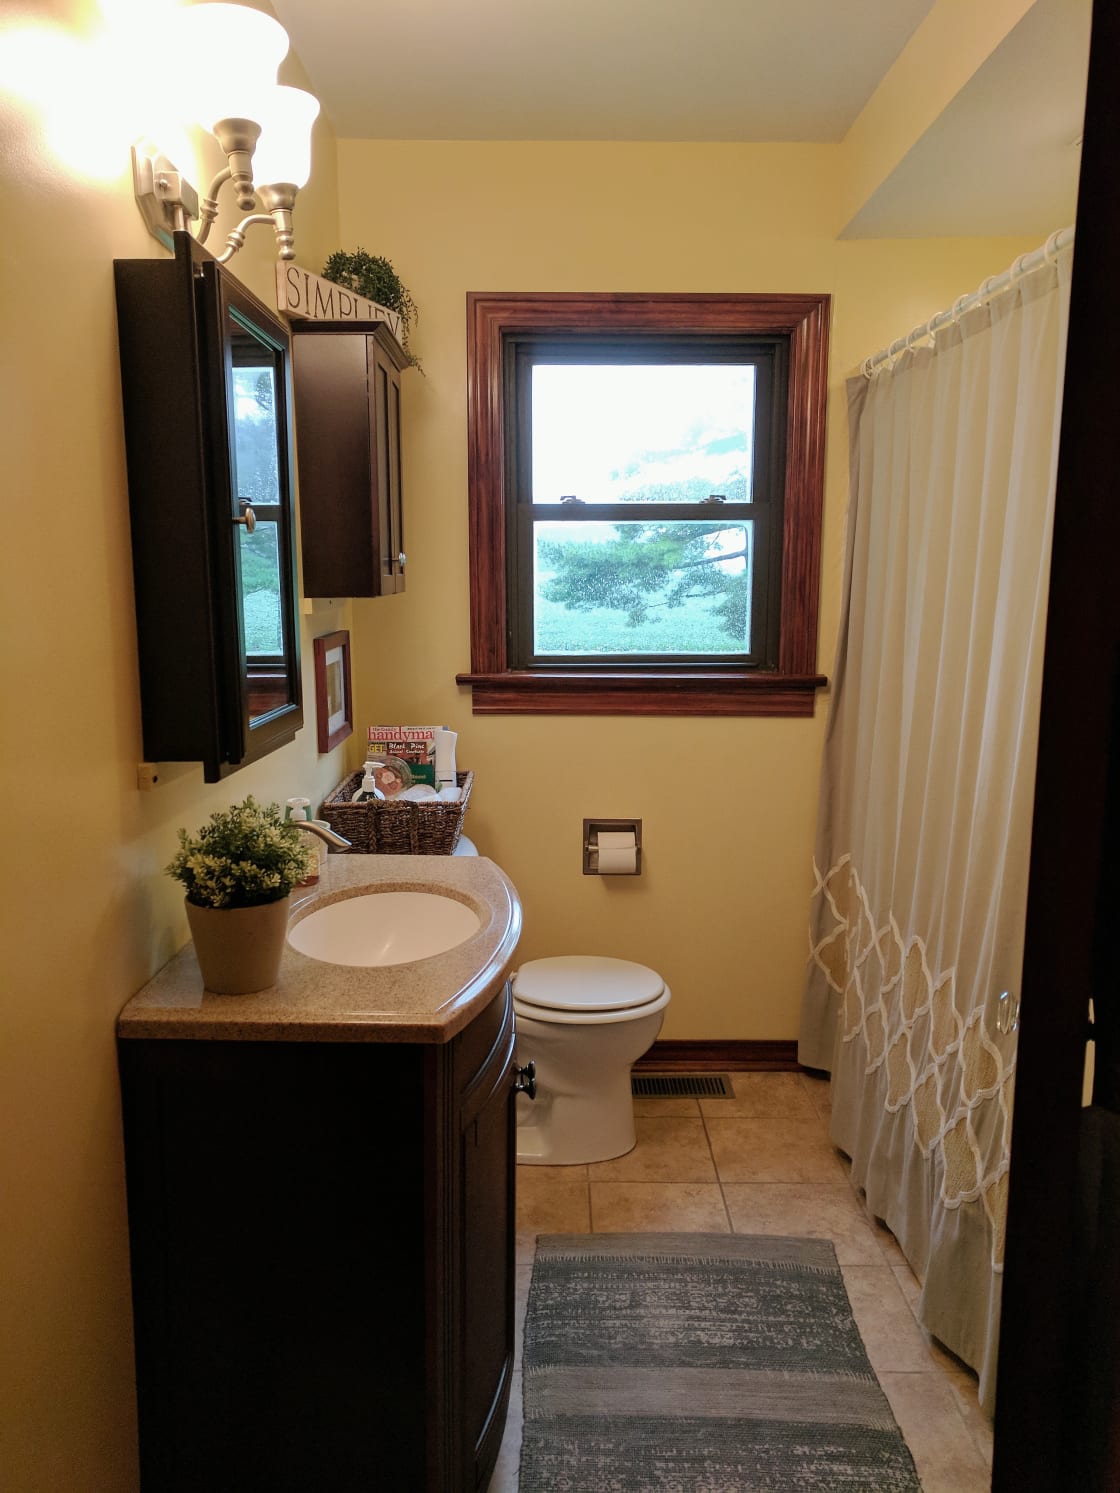 During your stay, you will have access to the house bathroom.